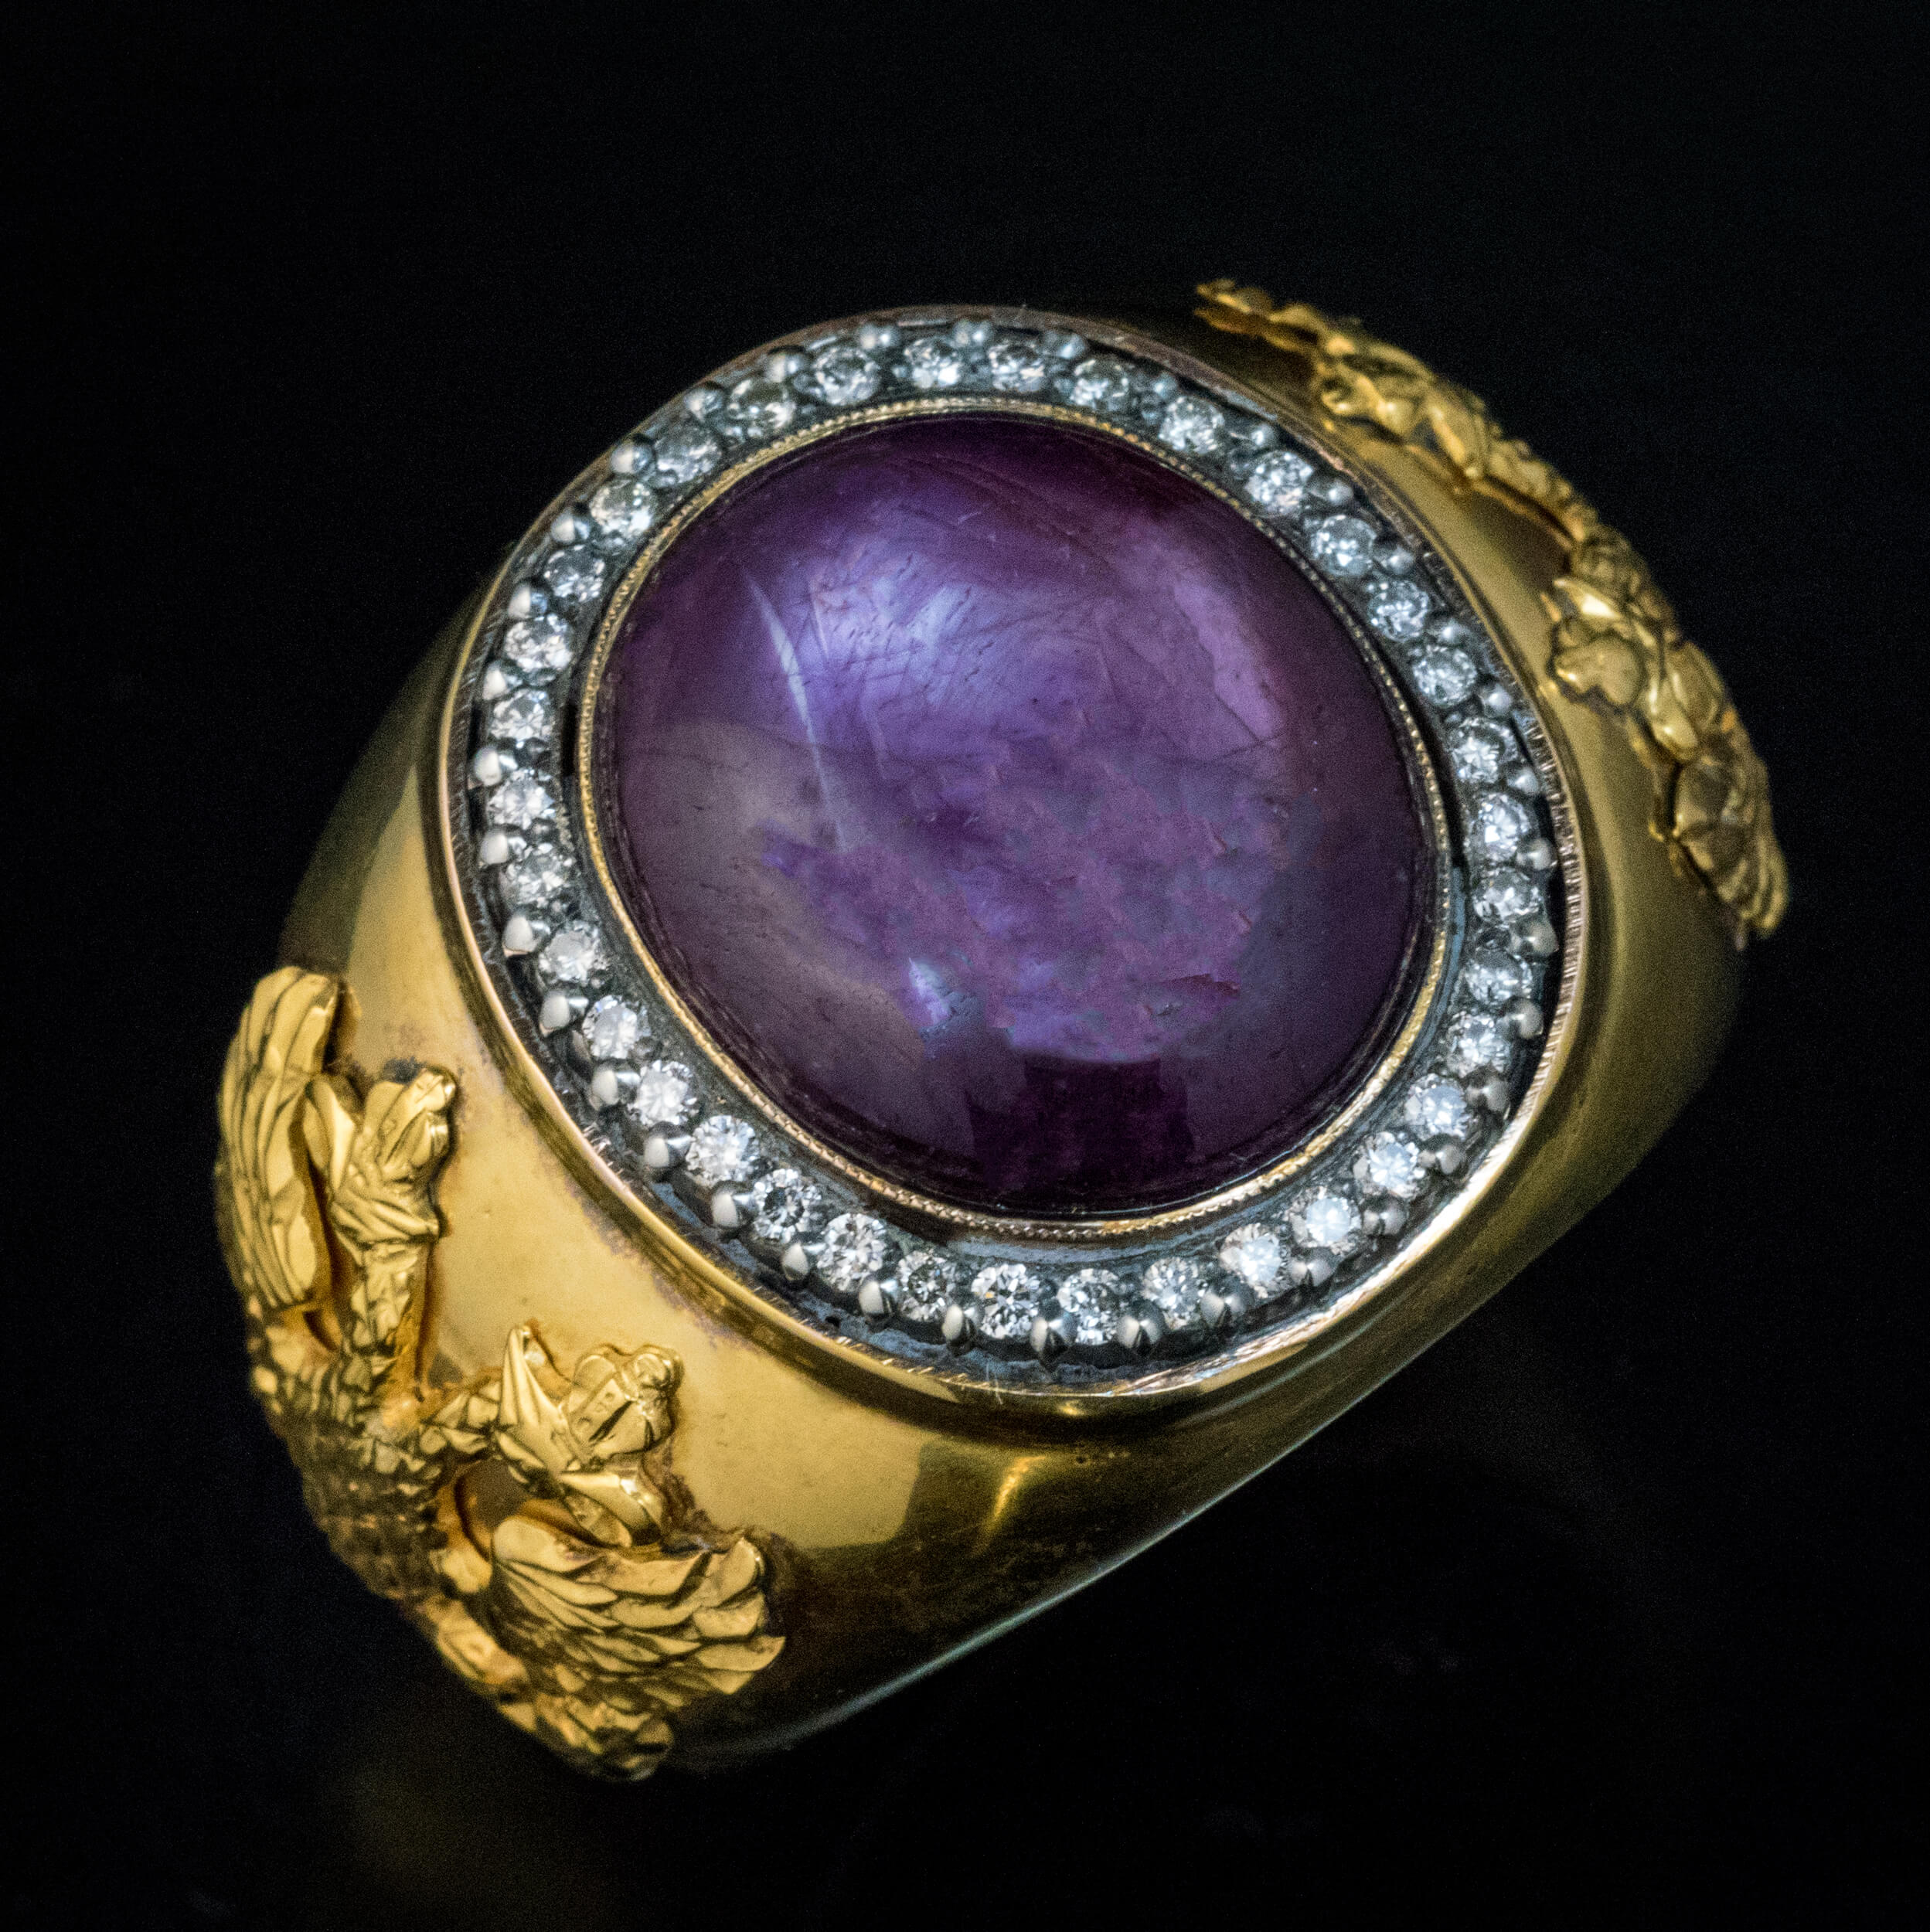 RACO Watch and Jewelry - Deep purple amethyst stone in a pretty 14kt white  gold ring with diamond accents Perfect for the February birthday girl  #february#februarybirthday#februarybirthstone#amethyst#amethystjewelry#amethystring#purplegemstone  ...